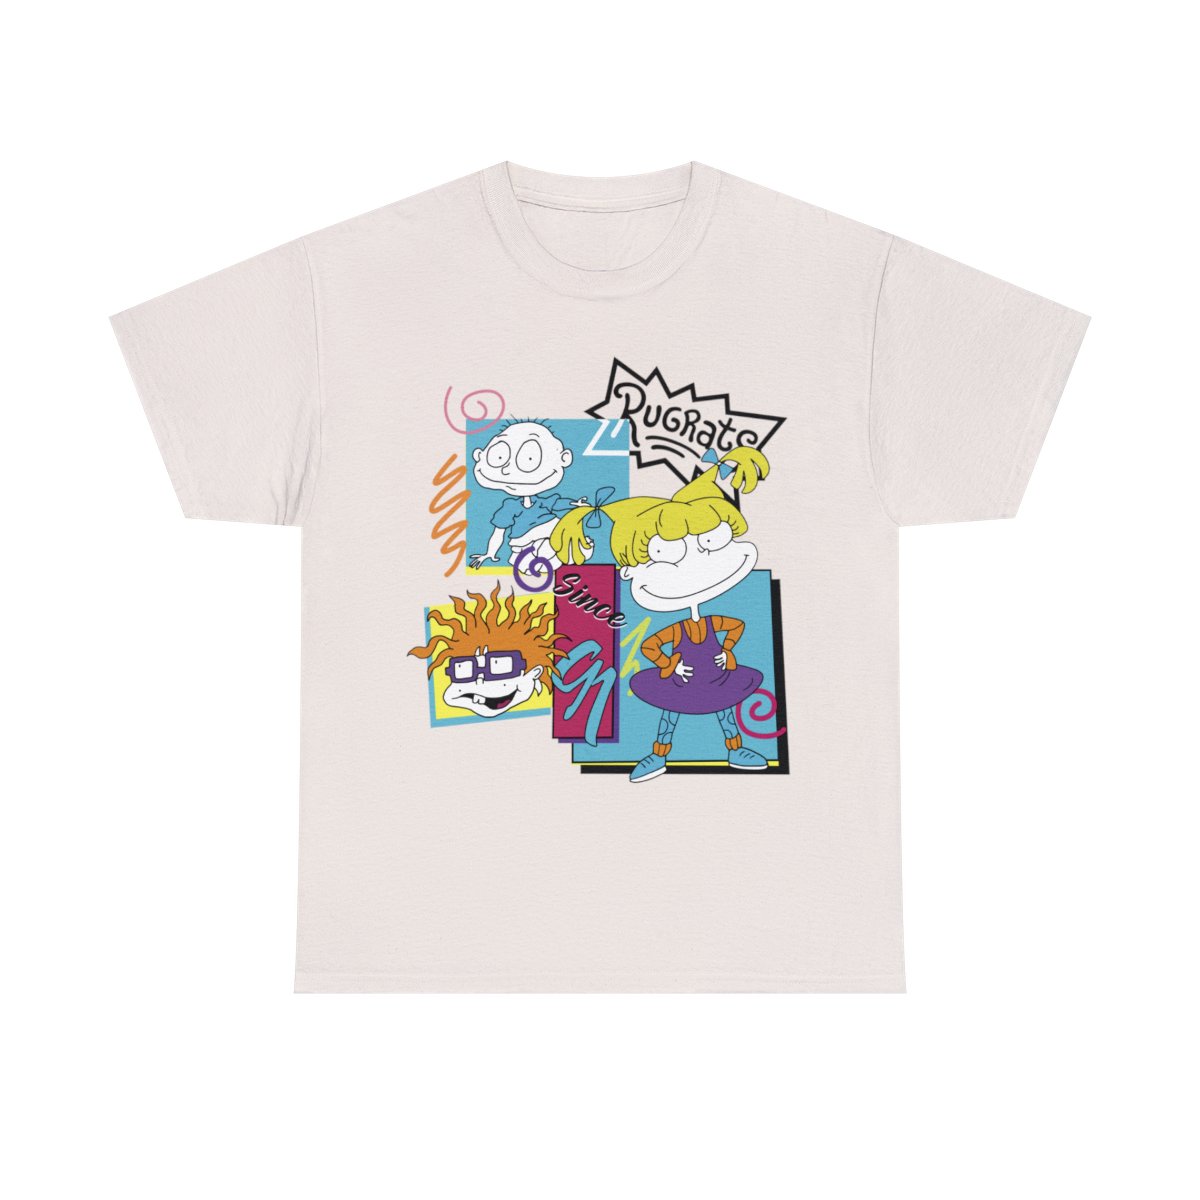 Rugrats T-shirt 1990’s Themed Fun Casual Retro Styling Unisex Heavy Cotton Tee